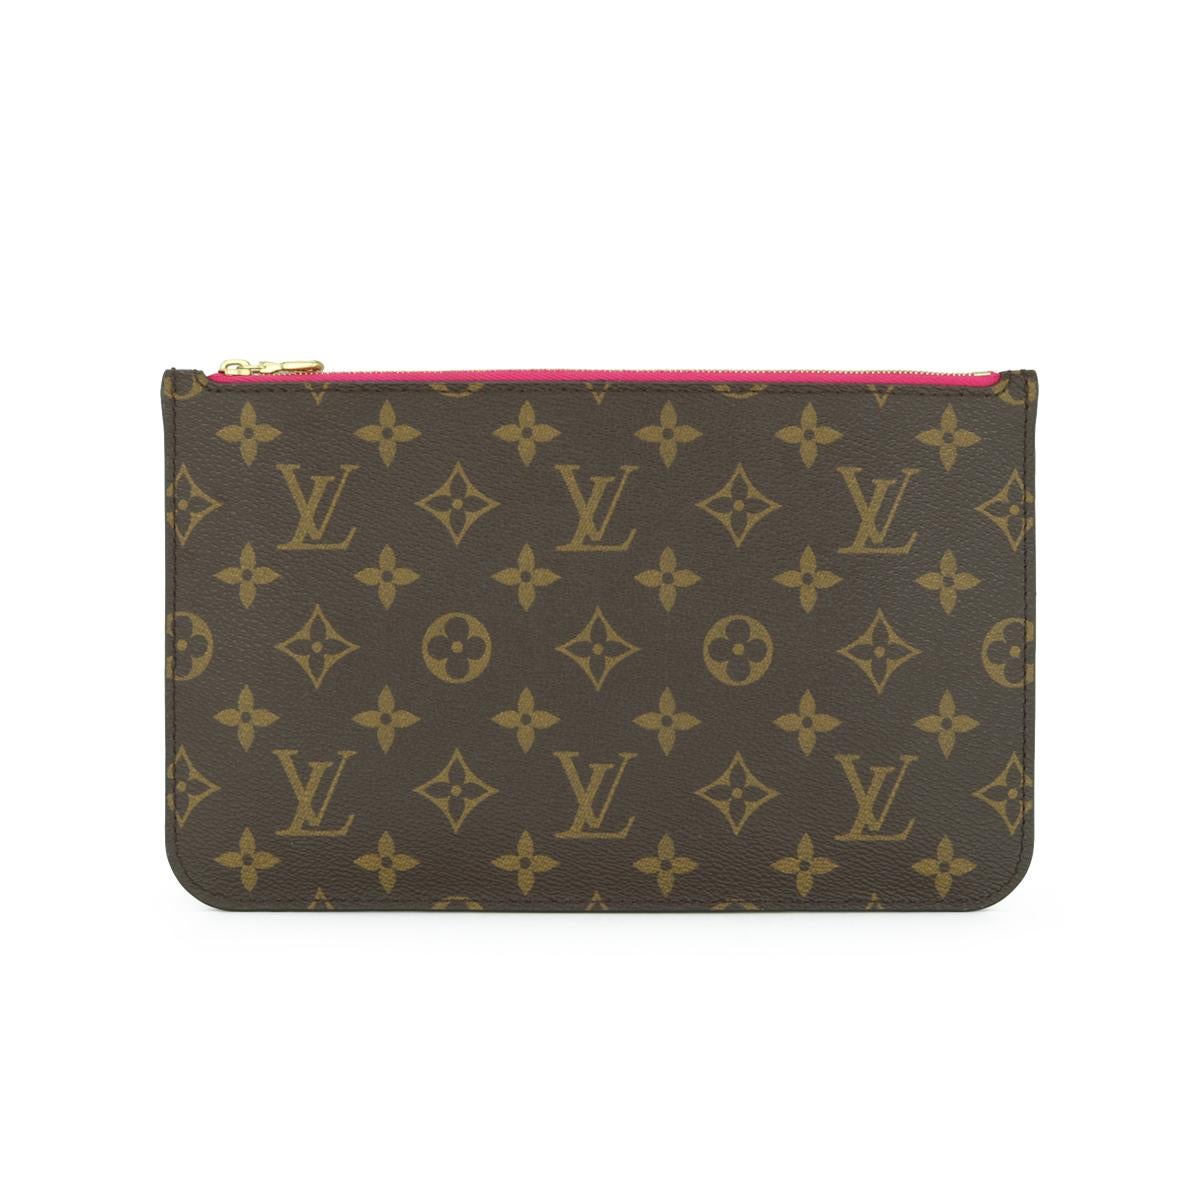 Louis Vuitton Neverfull MM Zip Pochette Pouch in Monogram with Pivoine Interior 2020.

This pouch is in excellent condition. 

- Exterior Condition: Excellent condition. There is very light inking wear to one corner. The calfskin vachette strap